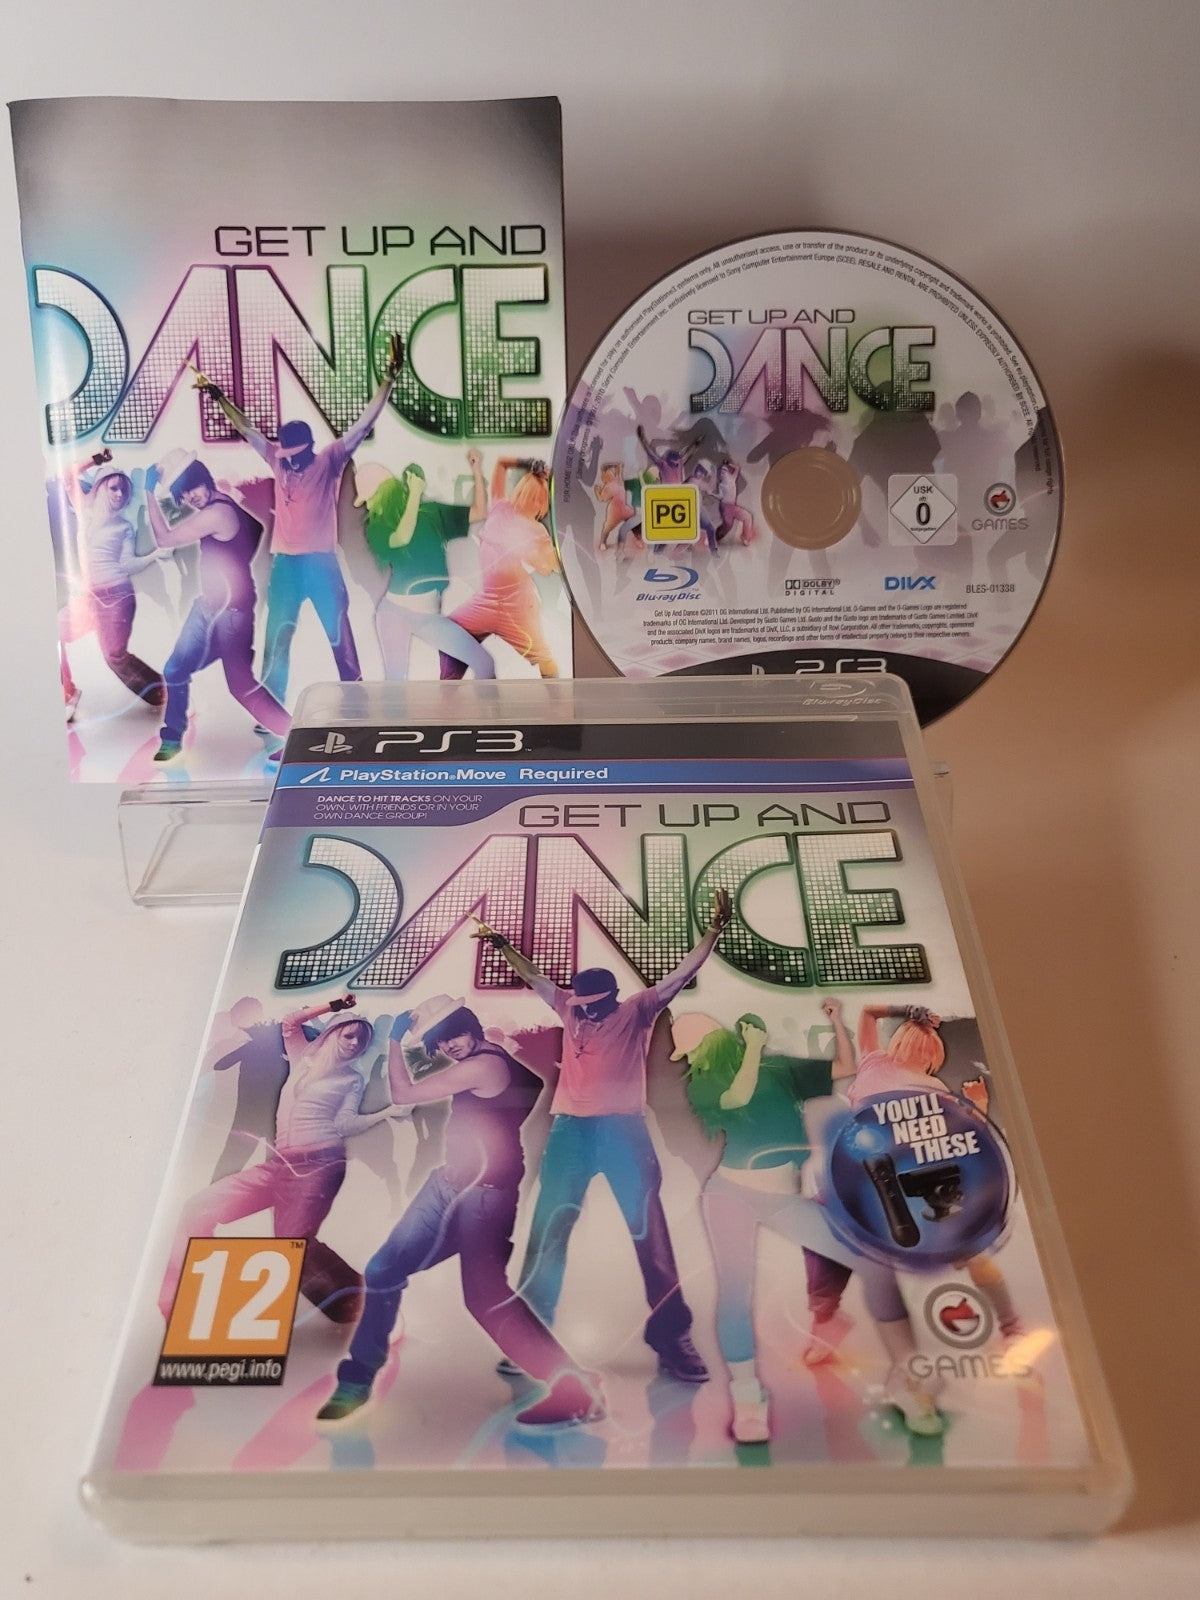 Get Up and Dance Playstation 3